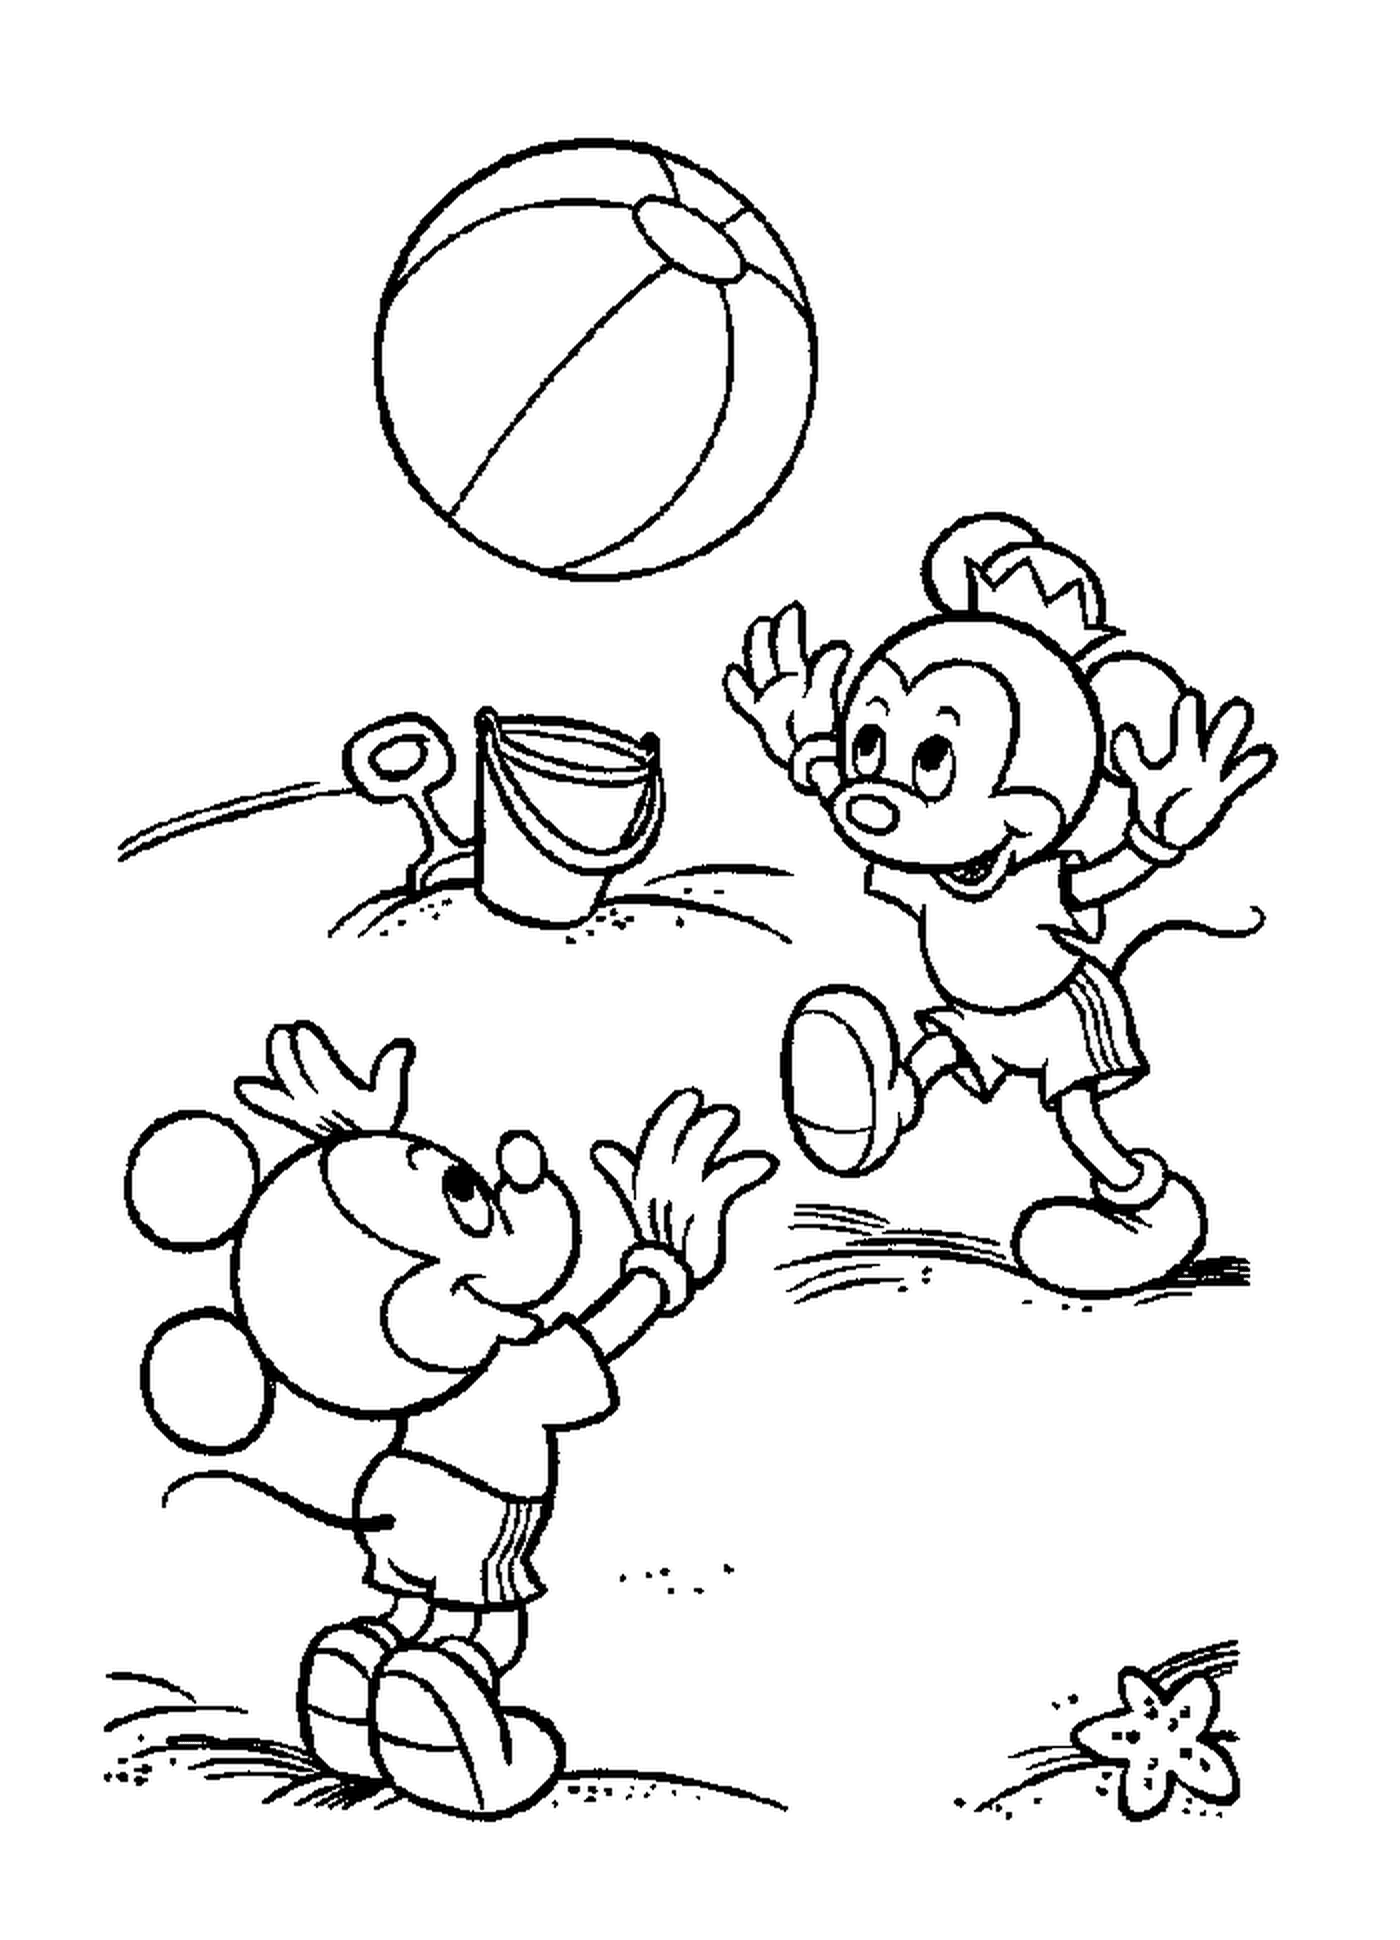  Mickey's kids at the beach: Mickey Mouse playing ball 